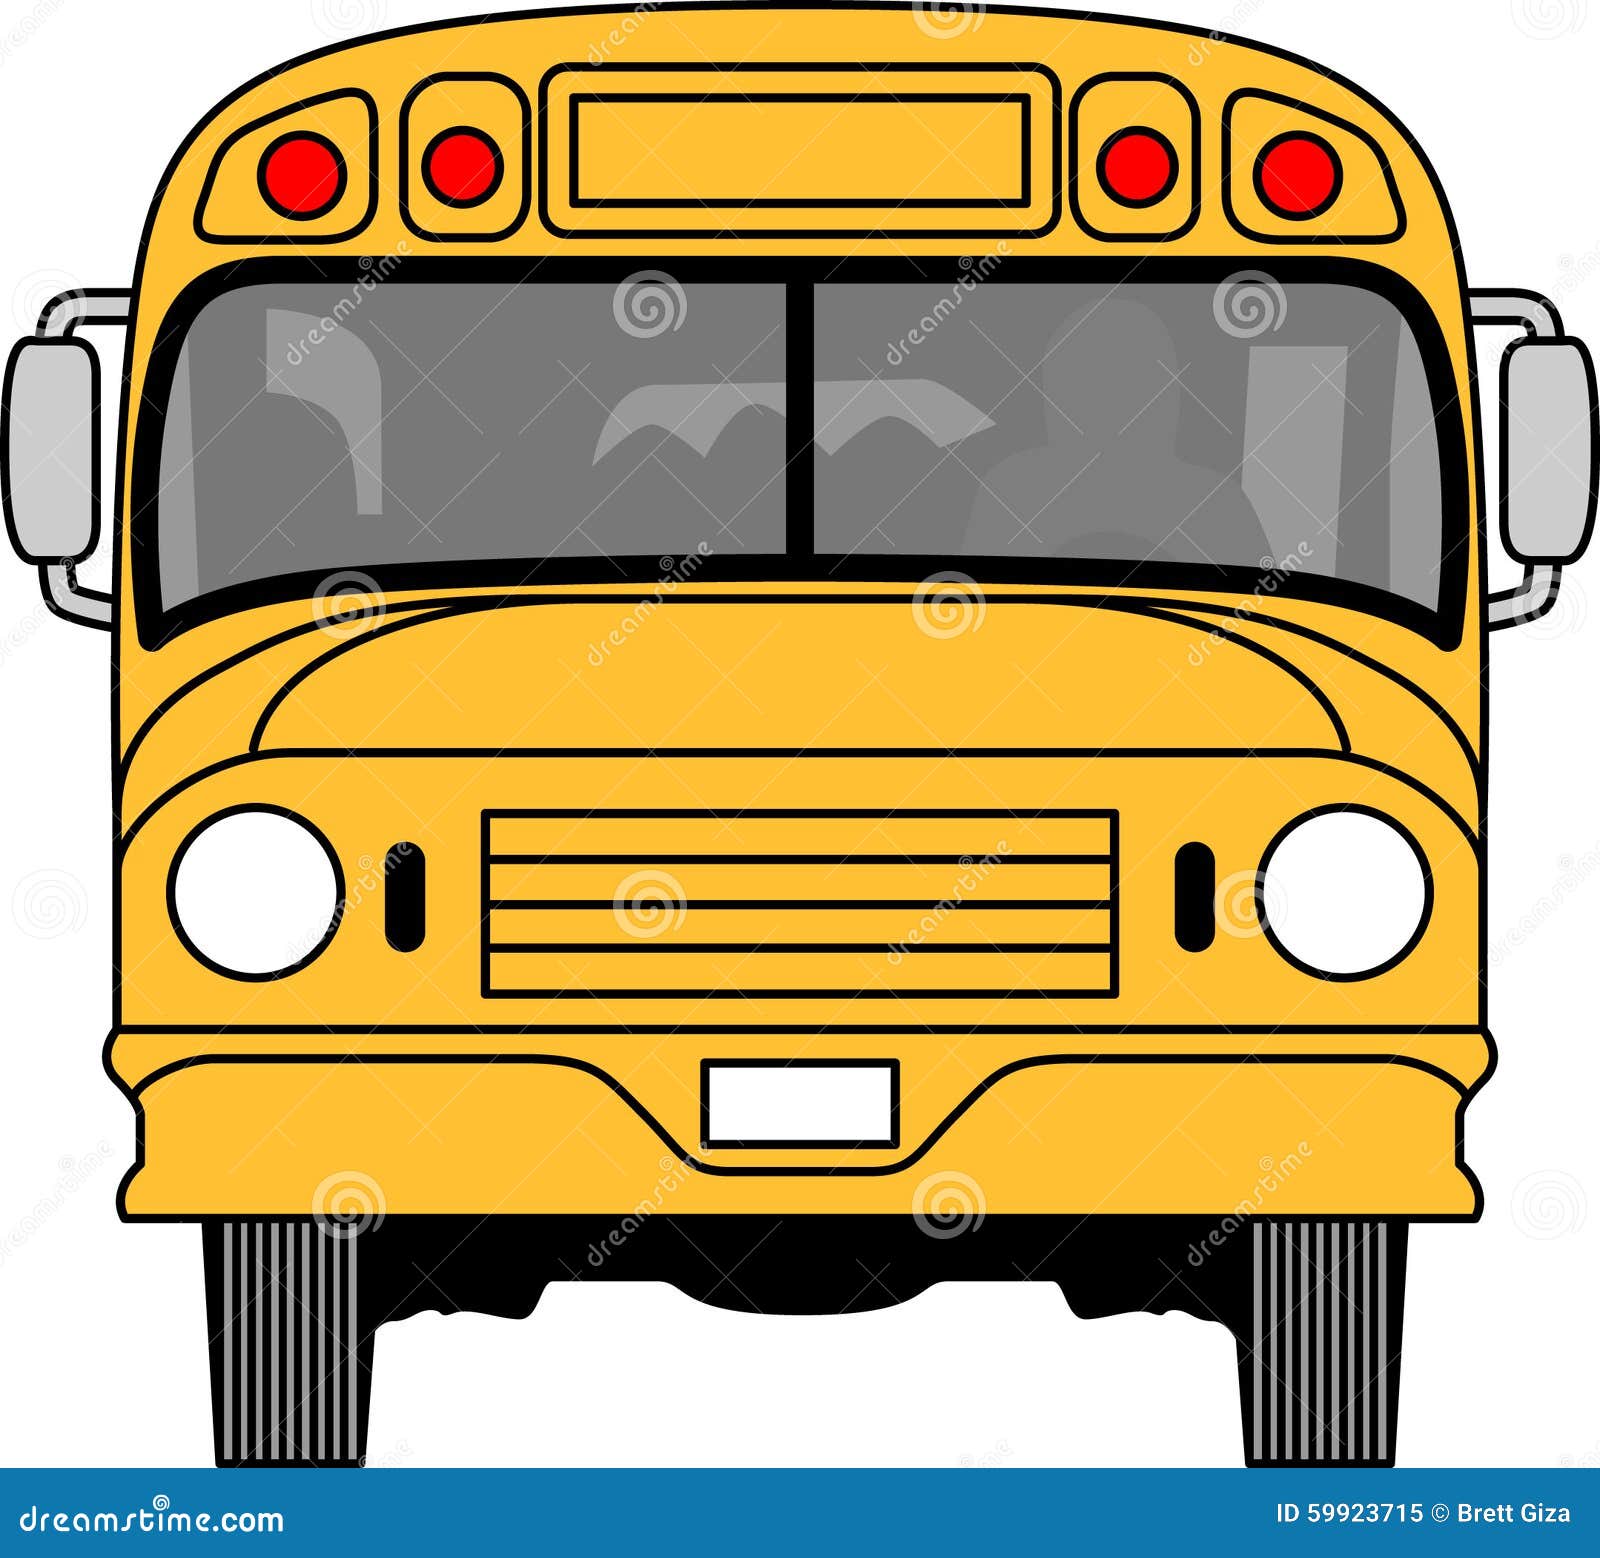 front of bus clipart - photo #36